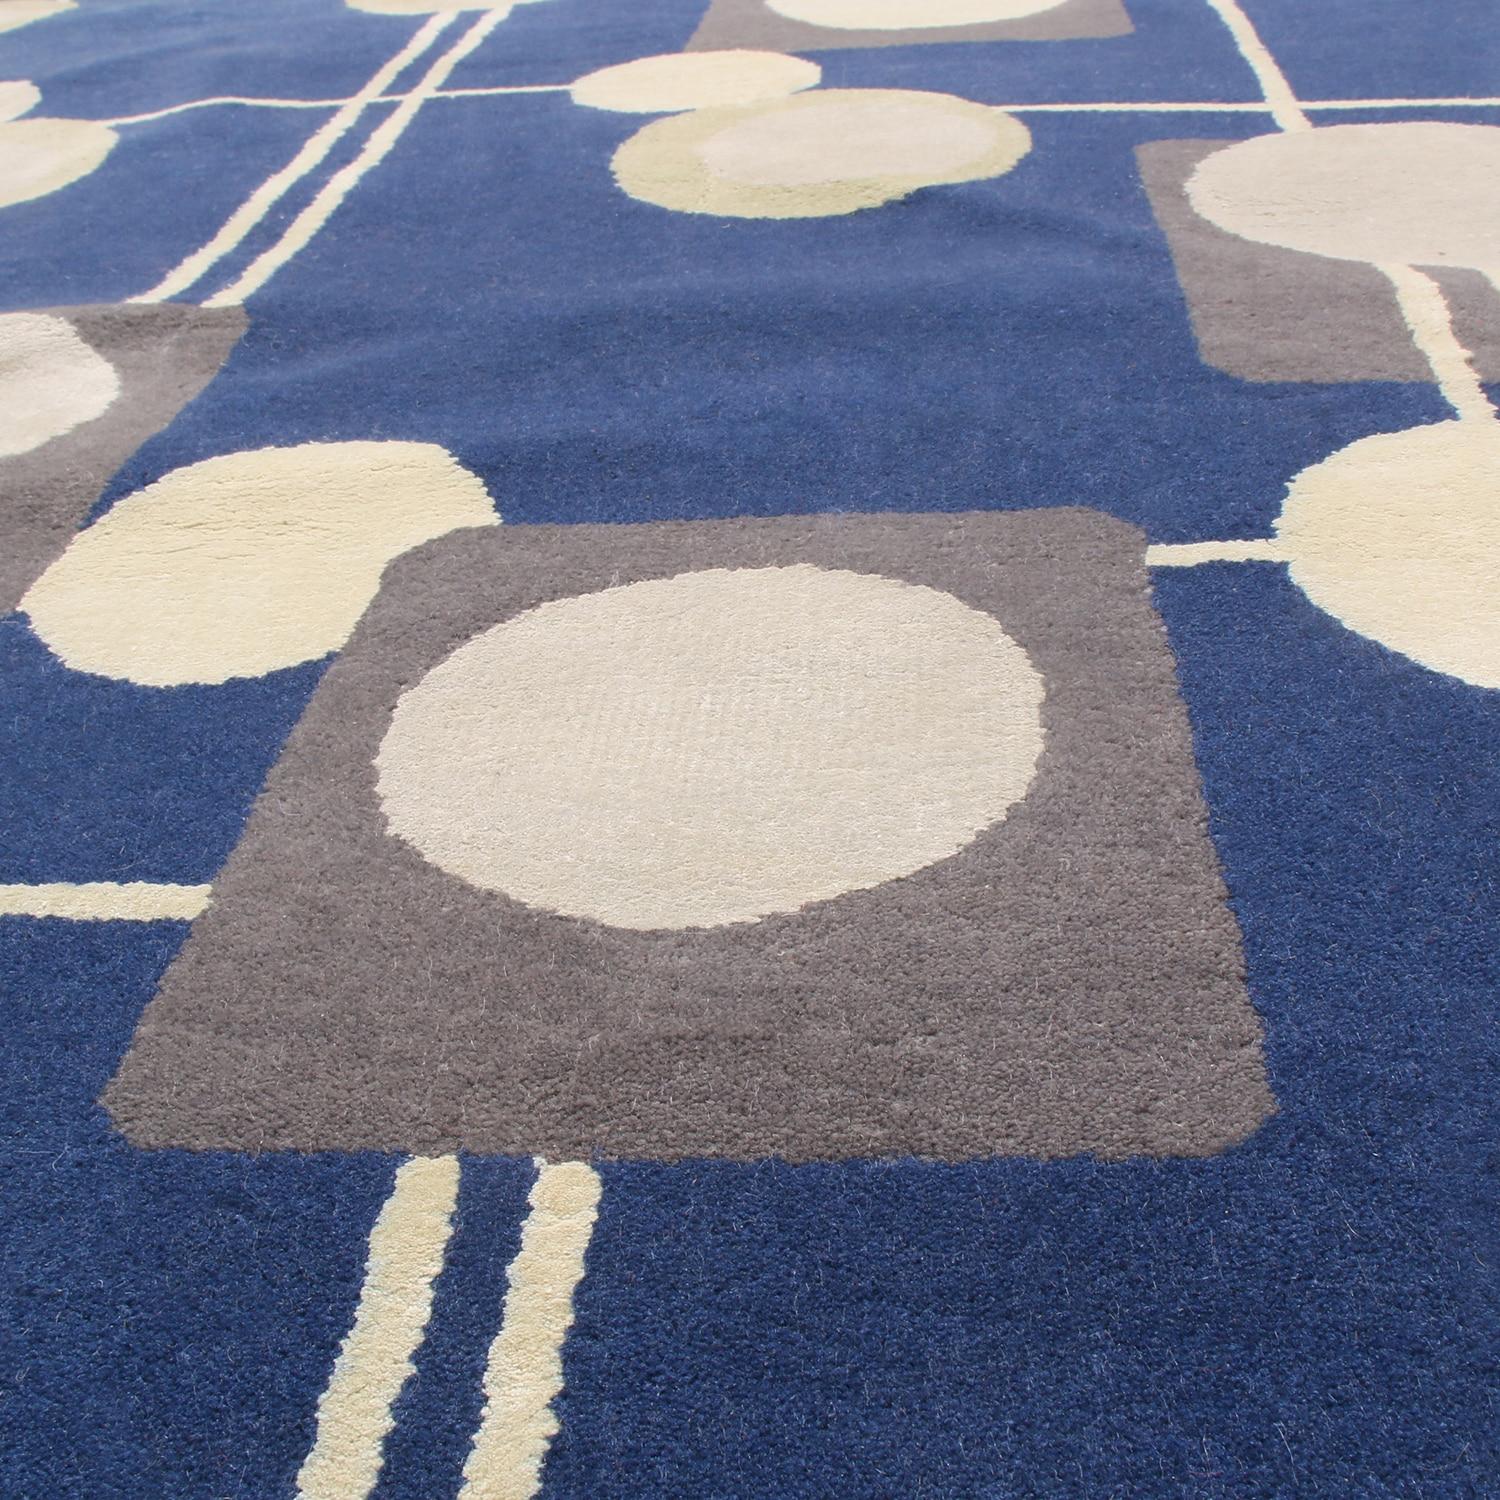 Gorgeous Blue Circle Mid-Century Modern Rug. Country of Origin: India/ Circa Date: Modern - Size: 6 ft 3 in x 8 ft 2 in (1.09 m x 2.48 m)